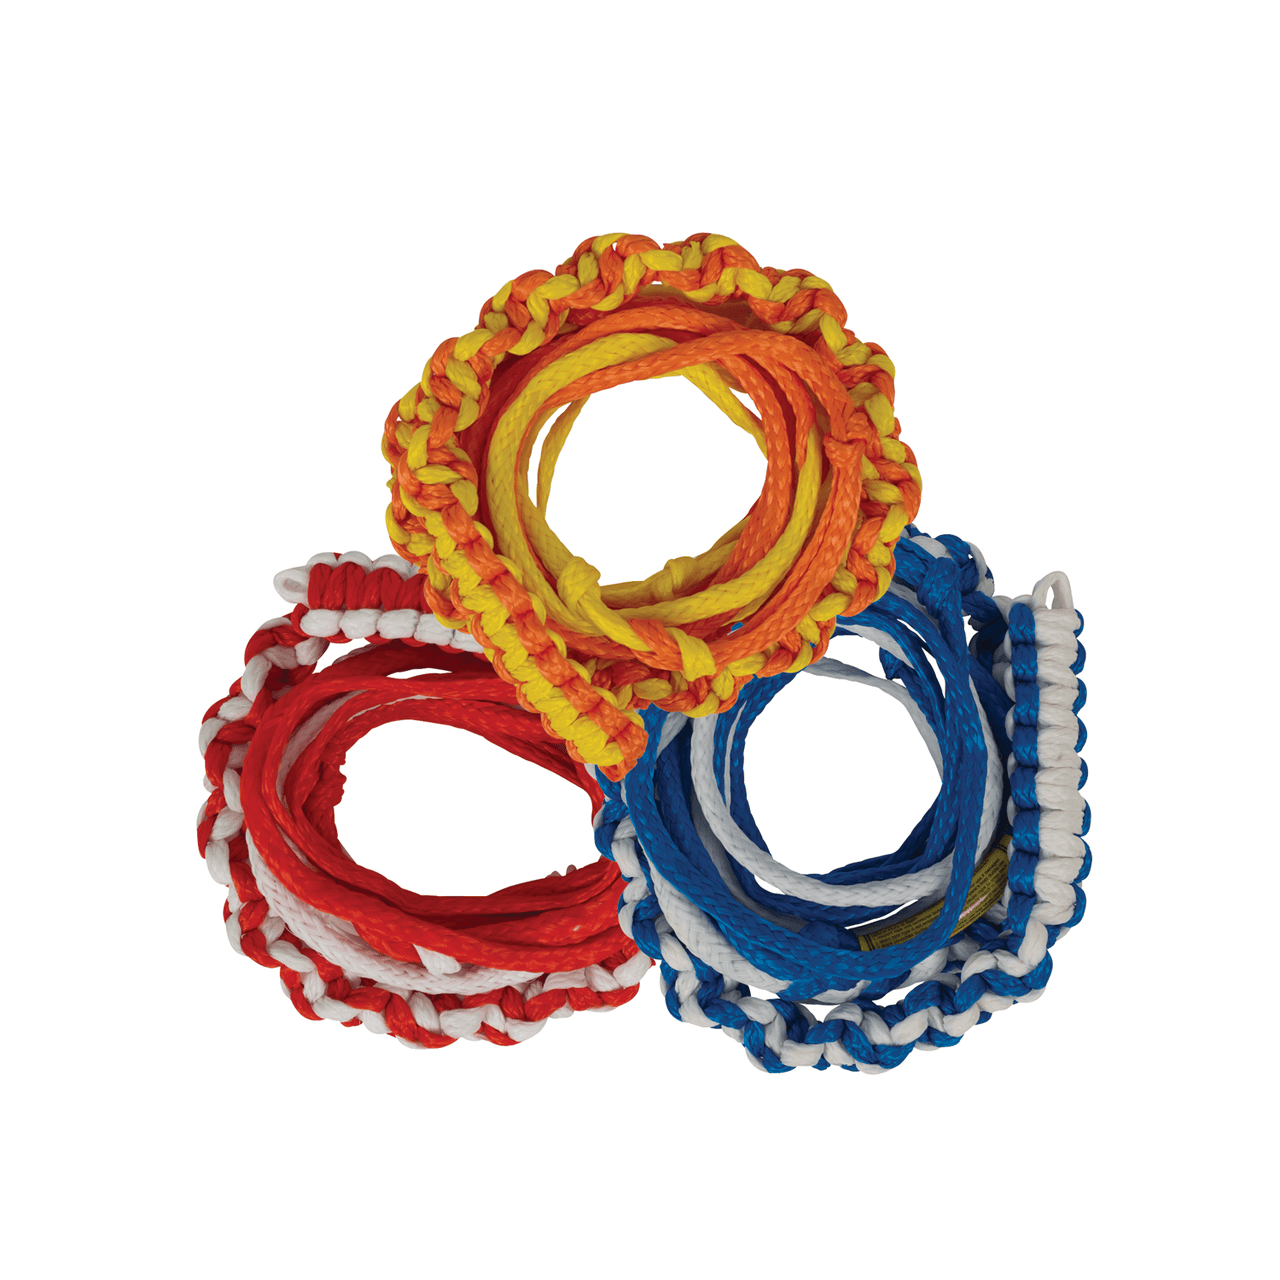 Hyperlite 20' Knotted Surf Rope - No Handle | Assorted Colors